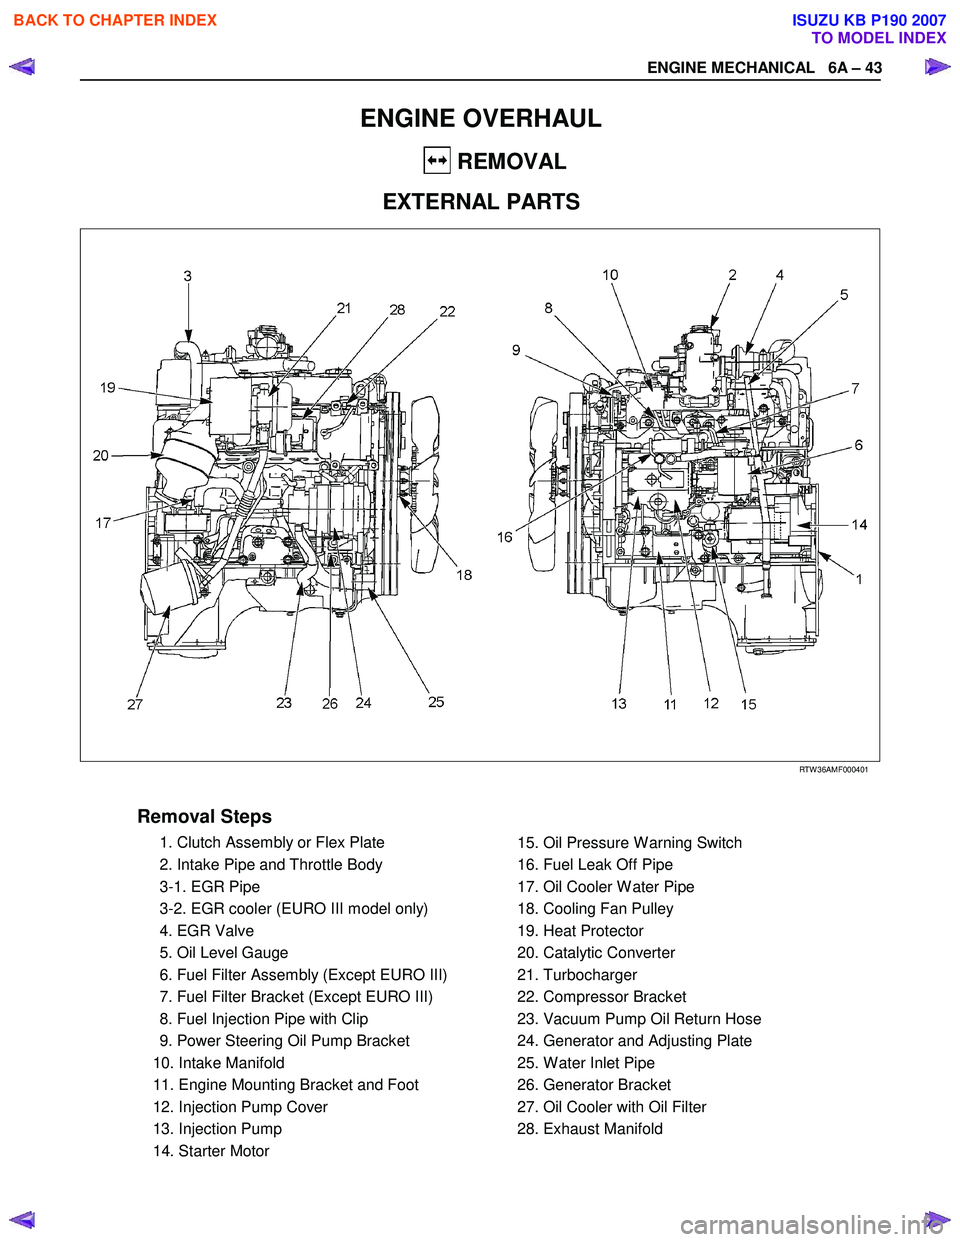 ISUZU KB P190 2007  Workshop Repair Manual ENGINE MECHANICAL   6A – 43 
 
ENGINE OVERHAUL 
  REMOVAL 
EXTERNAL PARTS 
   
 
 RTW 36AMF000401 
 
Removal Steps    
  1. Clutch Assembly or Flex Plate  
  2. Intake Pipe and Throttle Body 
  3-1.